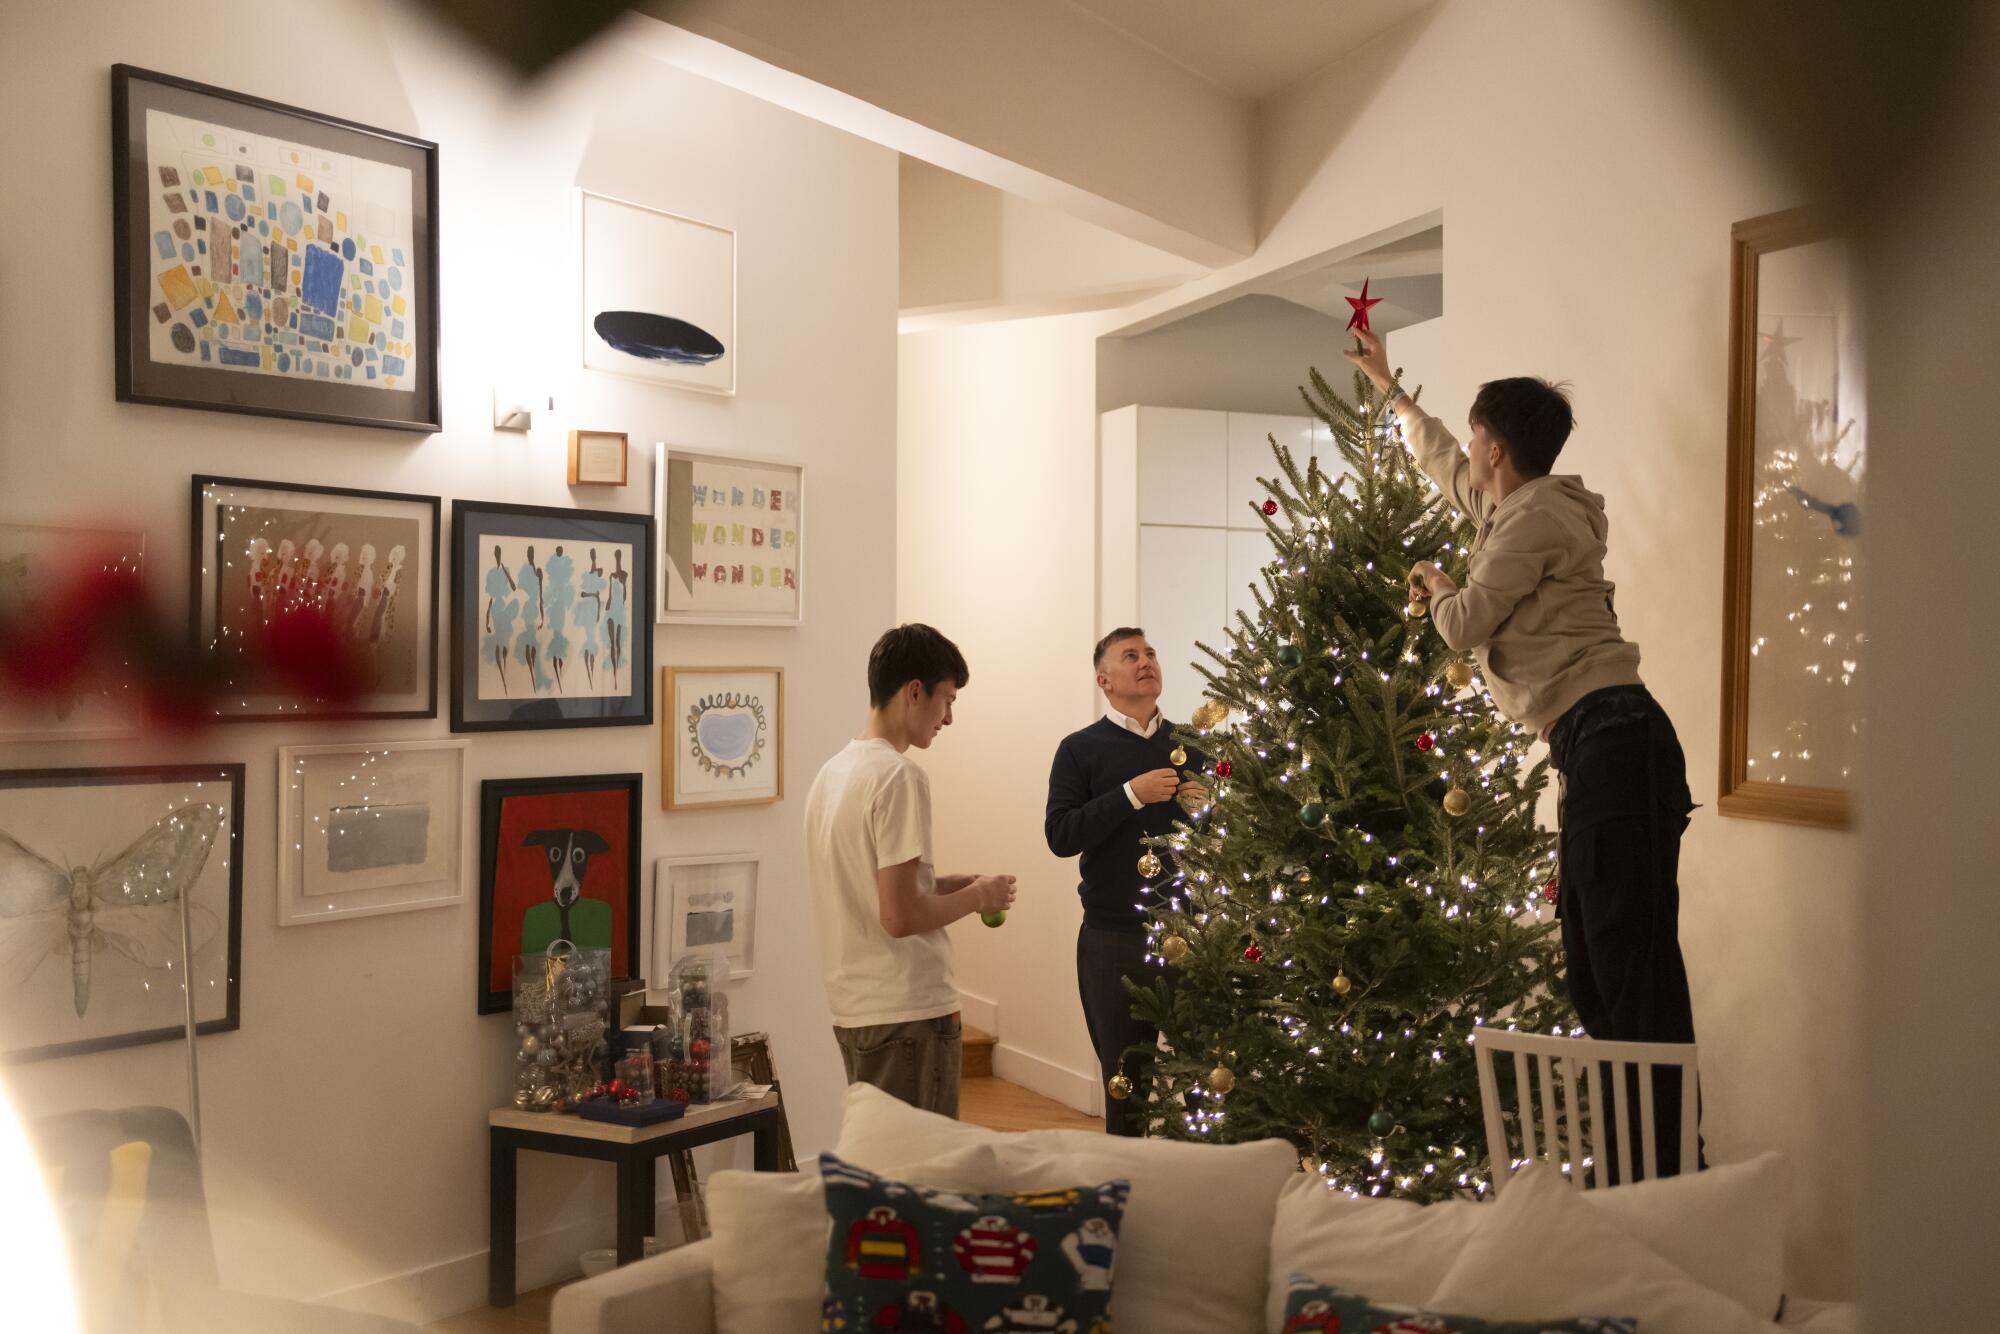 A young man stands on a chair to decorate a Christmas tree as his father and brother stand nearby.